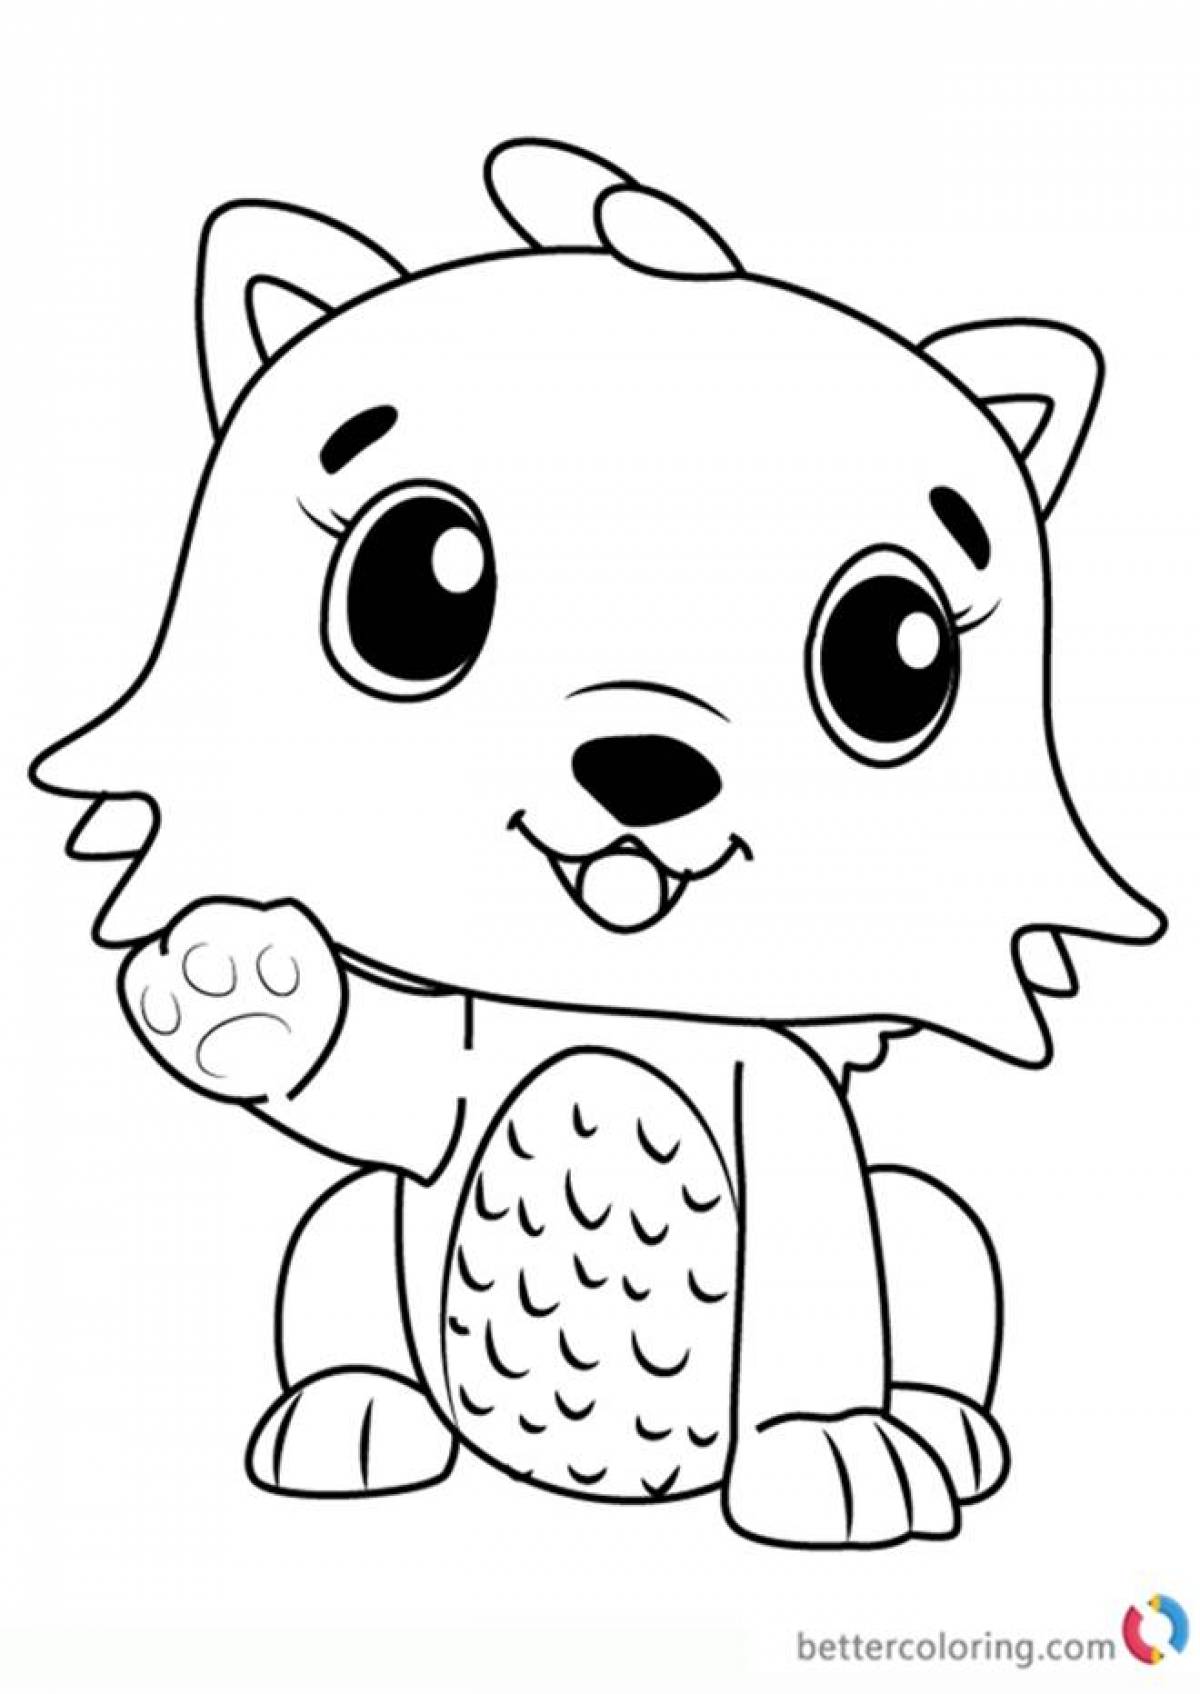 Perfect coloring book for girls cute animals